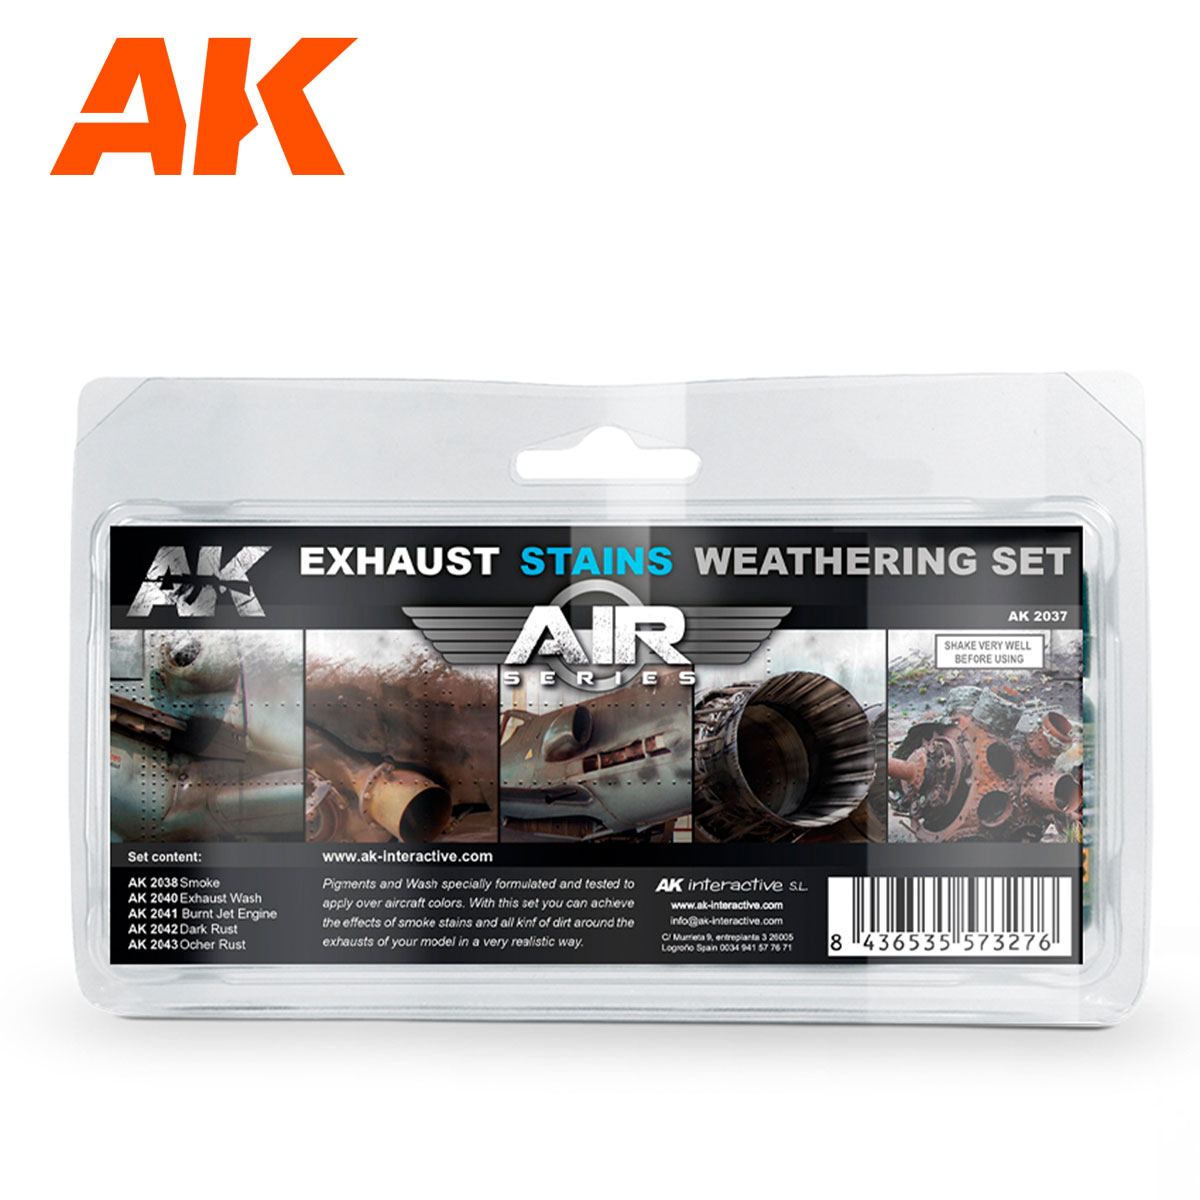 Buy Exhaust Stains Weathering Set (Air Series) online for 18,75